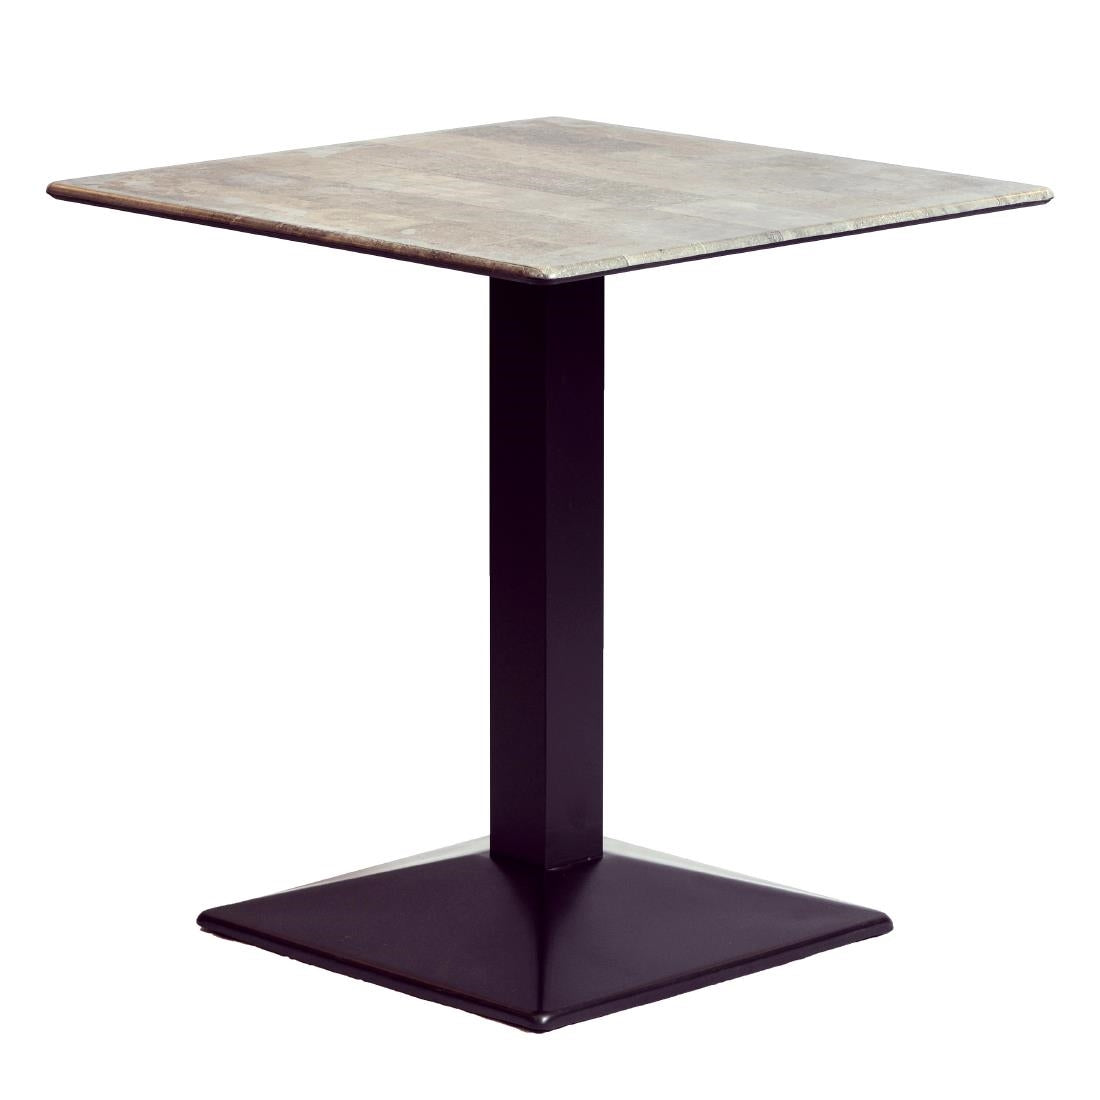 CZ815 Turin Metal Base Square Dining Table with Laminate Top Concrete 700mm JD Catering Equipment Solutions Ltd